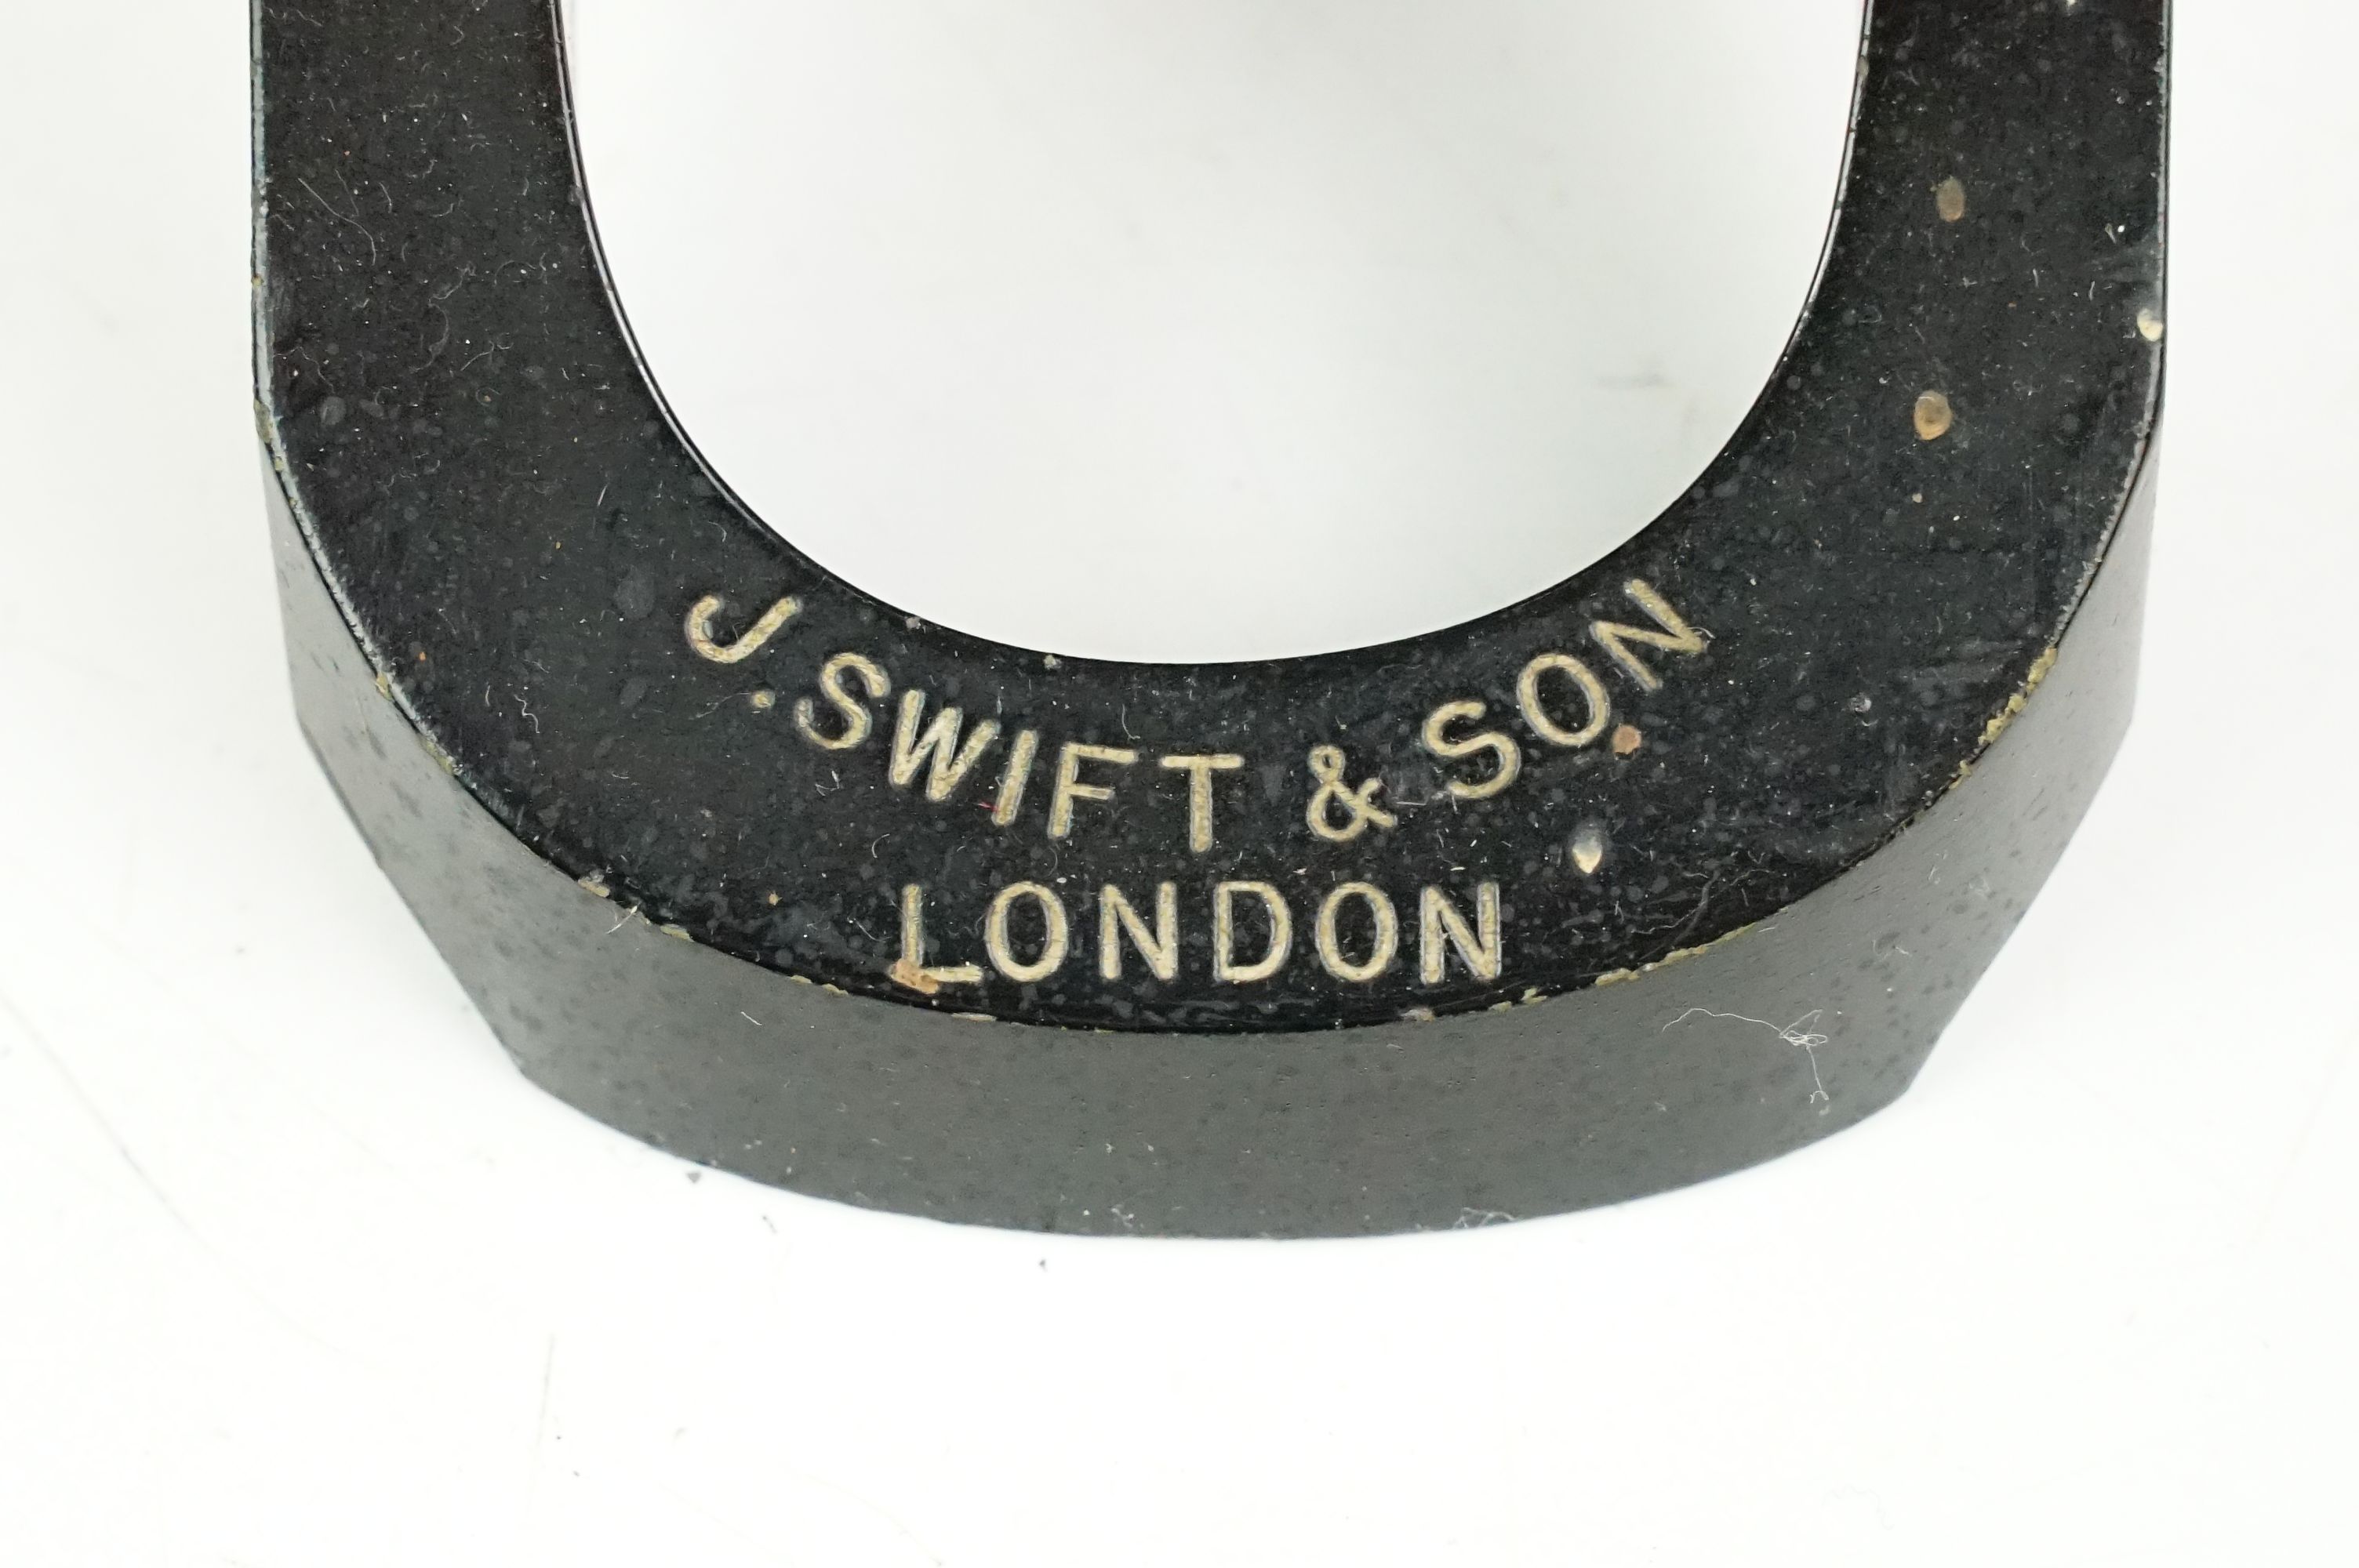 J. Swift & Son of London brass lacquered microscope, housed within a wooden carry case (missing - Image 4 of 11